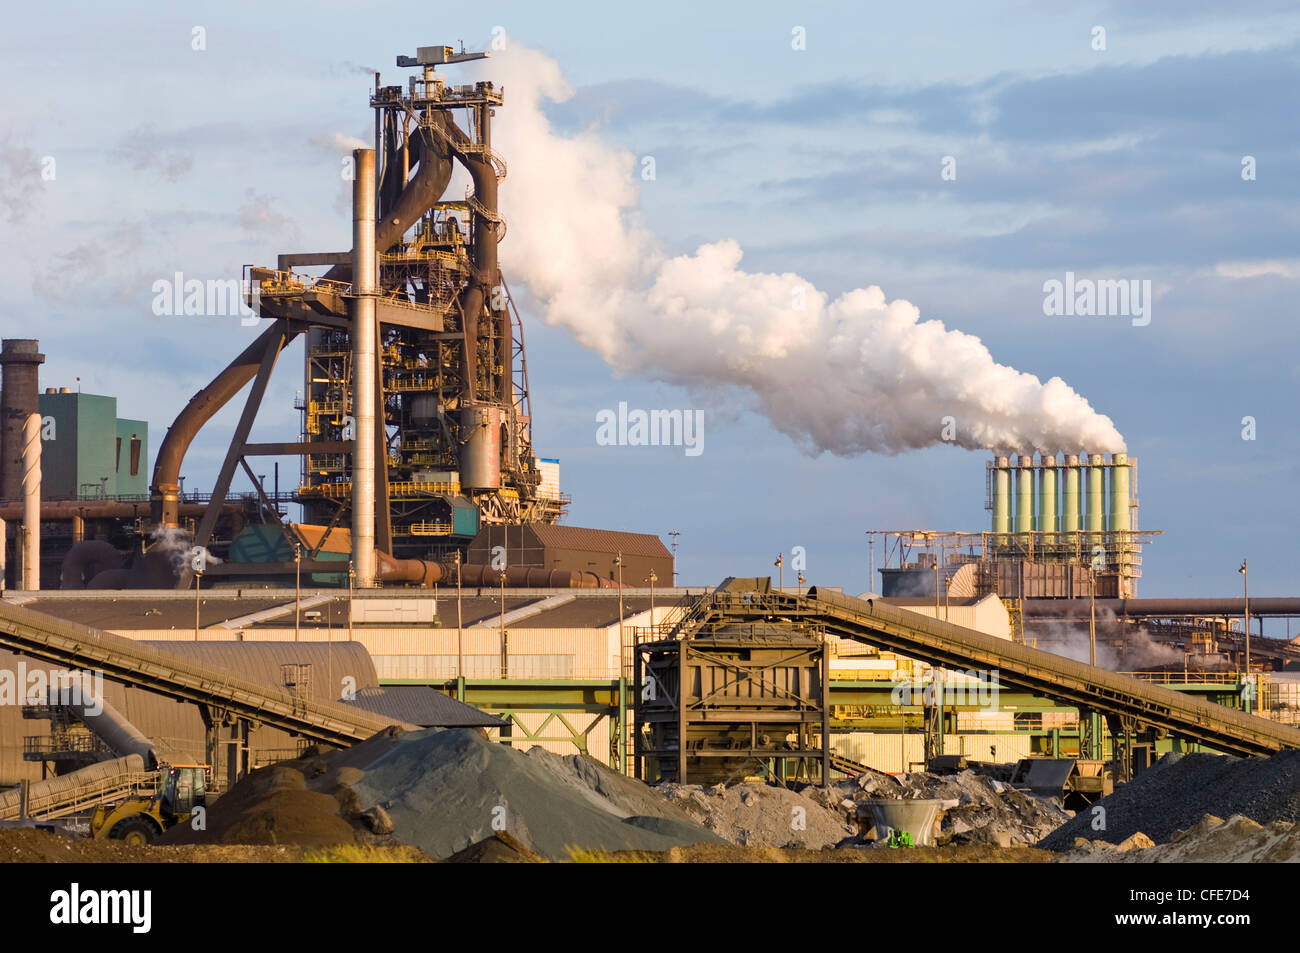 Blast furnace and cokes factory in the evening light Stock Photo